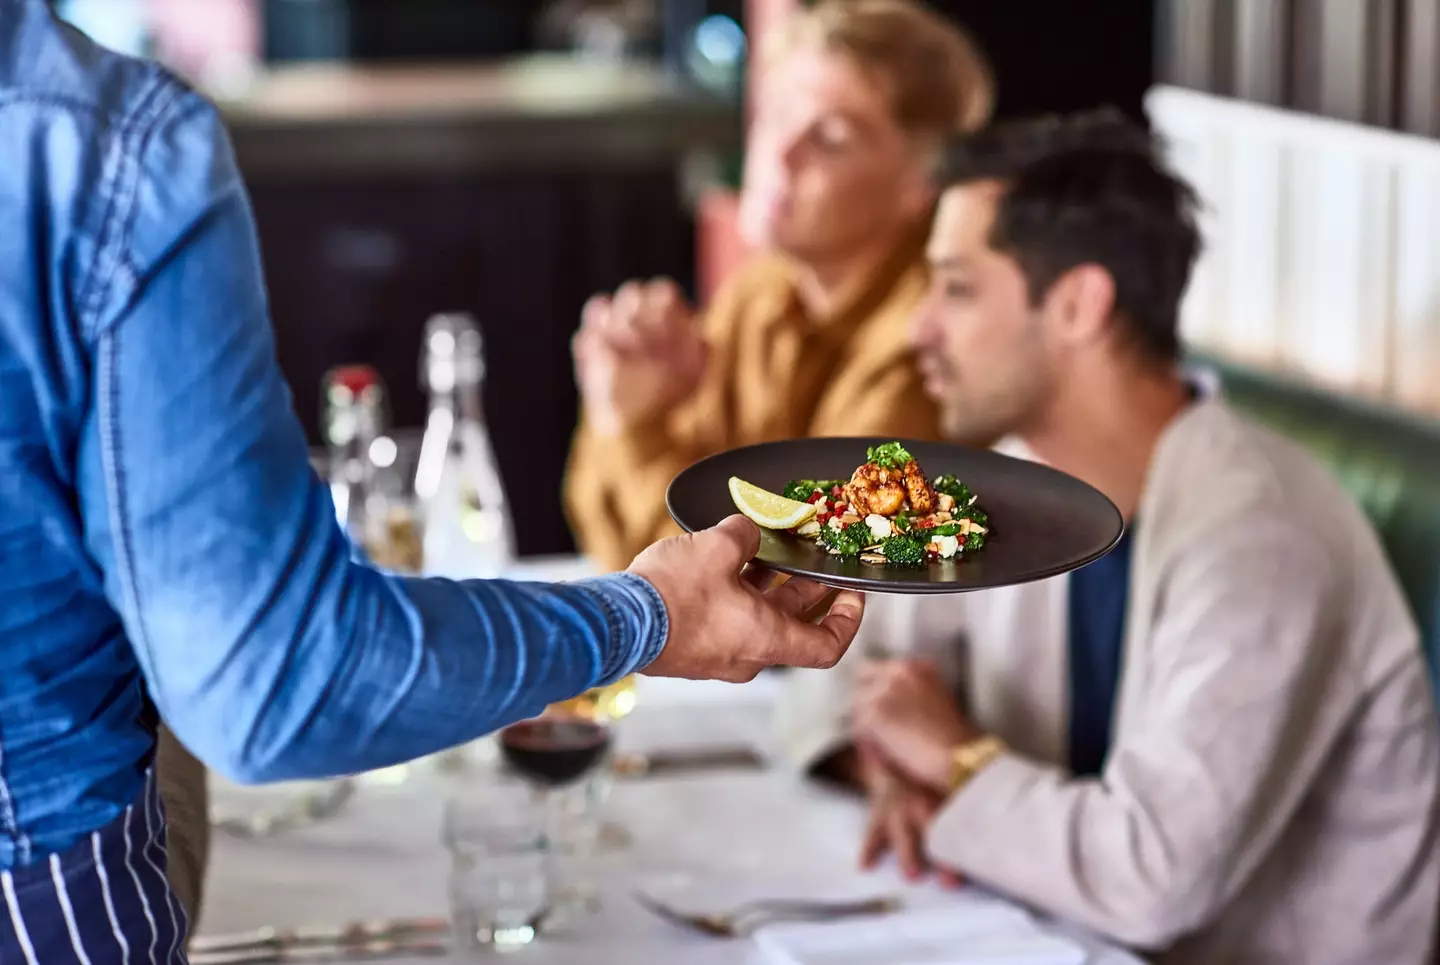 People have been left divided by the server's opinion. (Getty Stock Image)